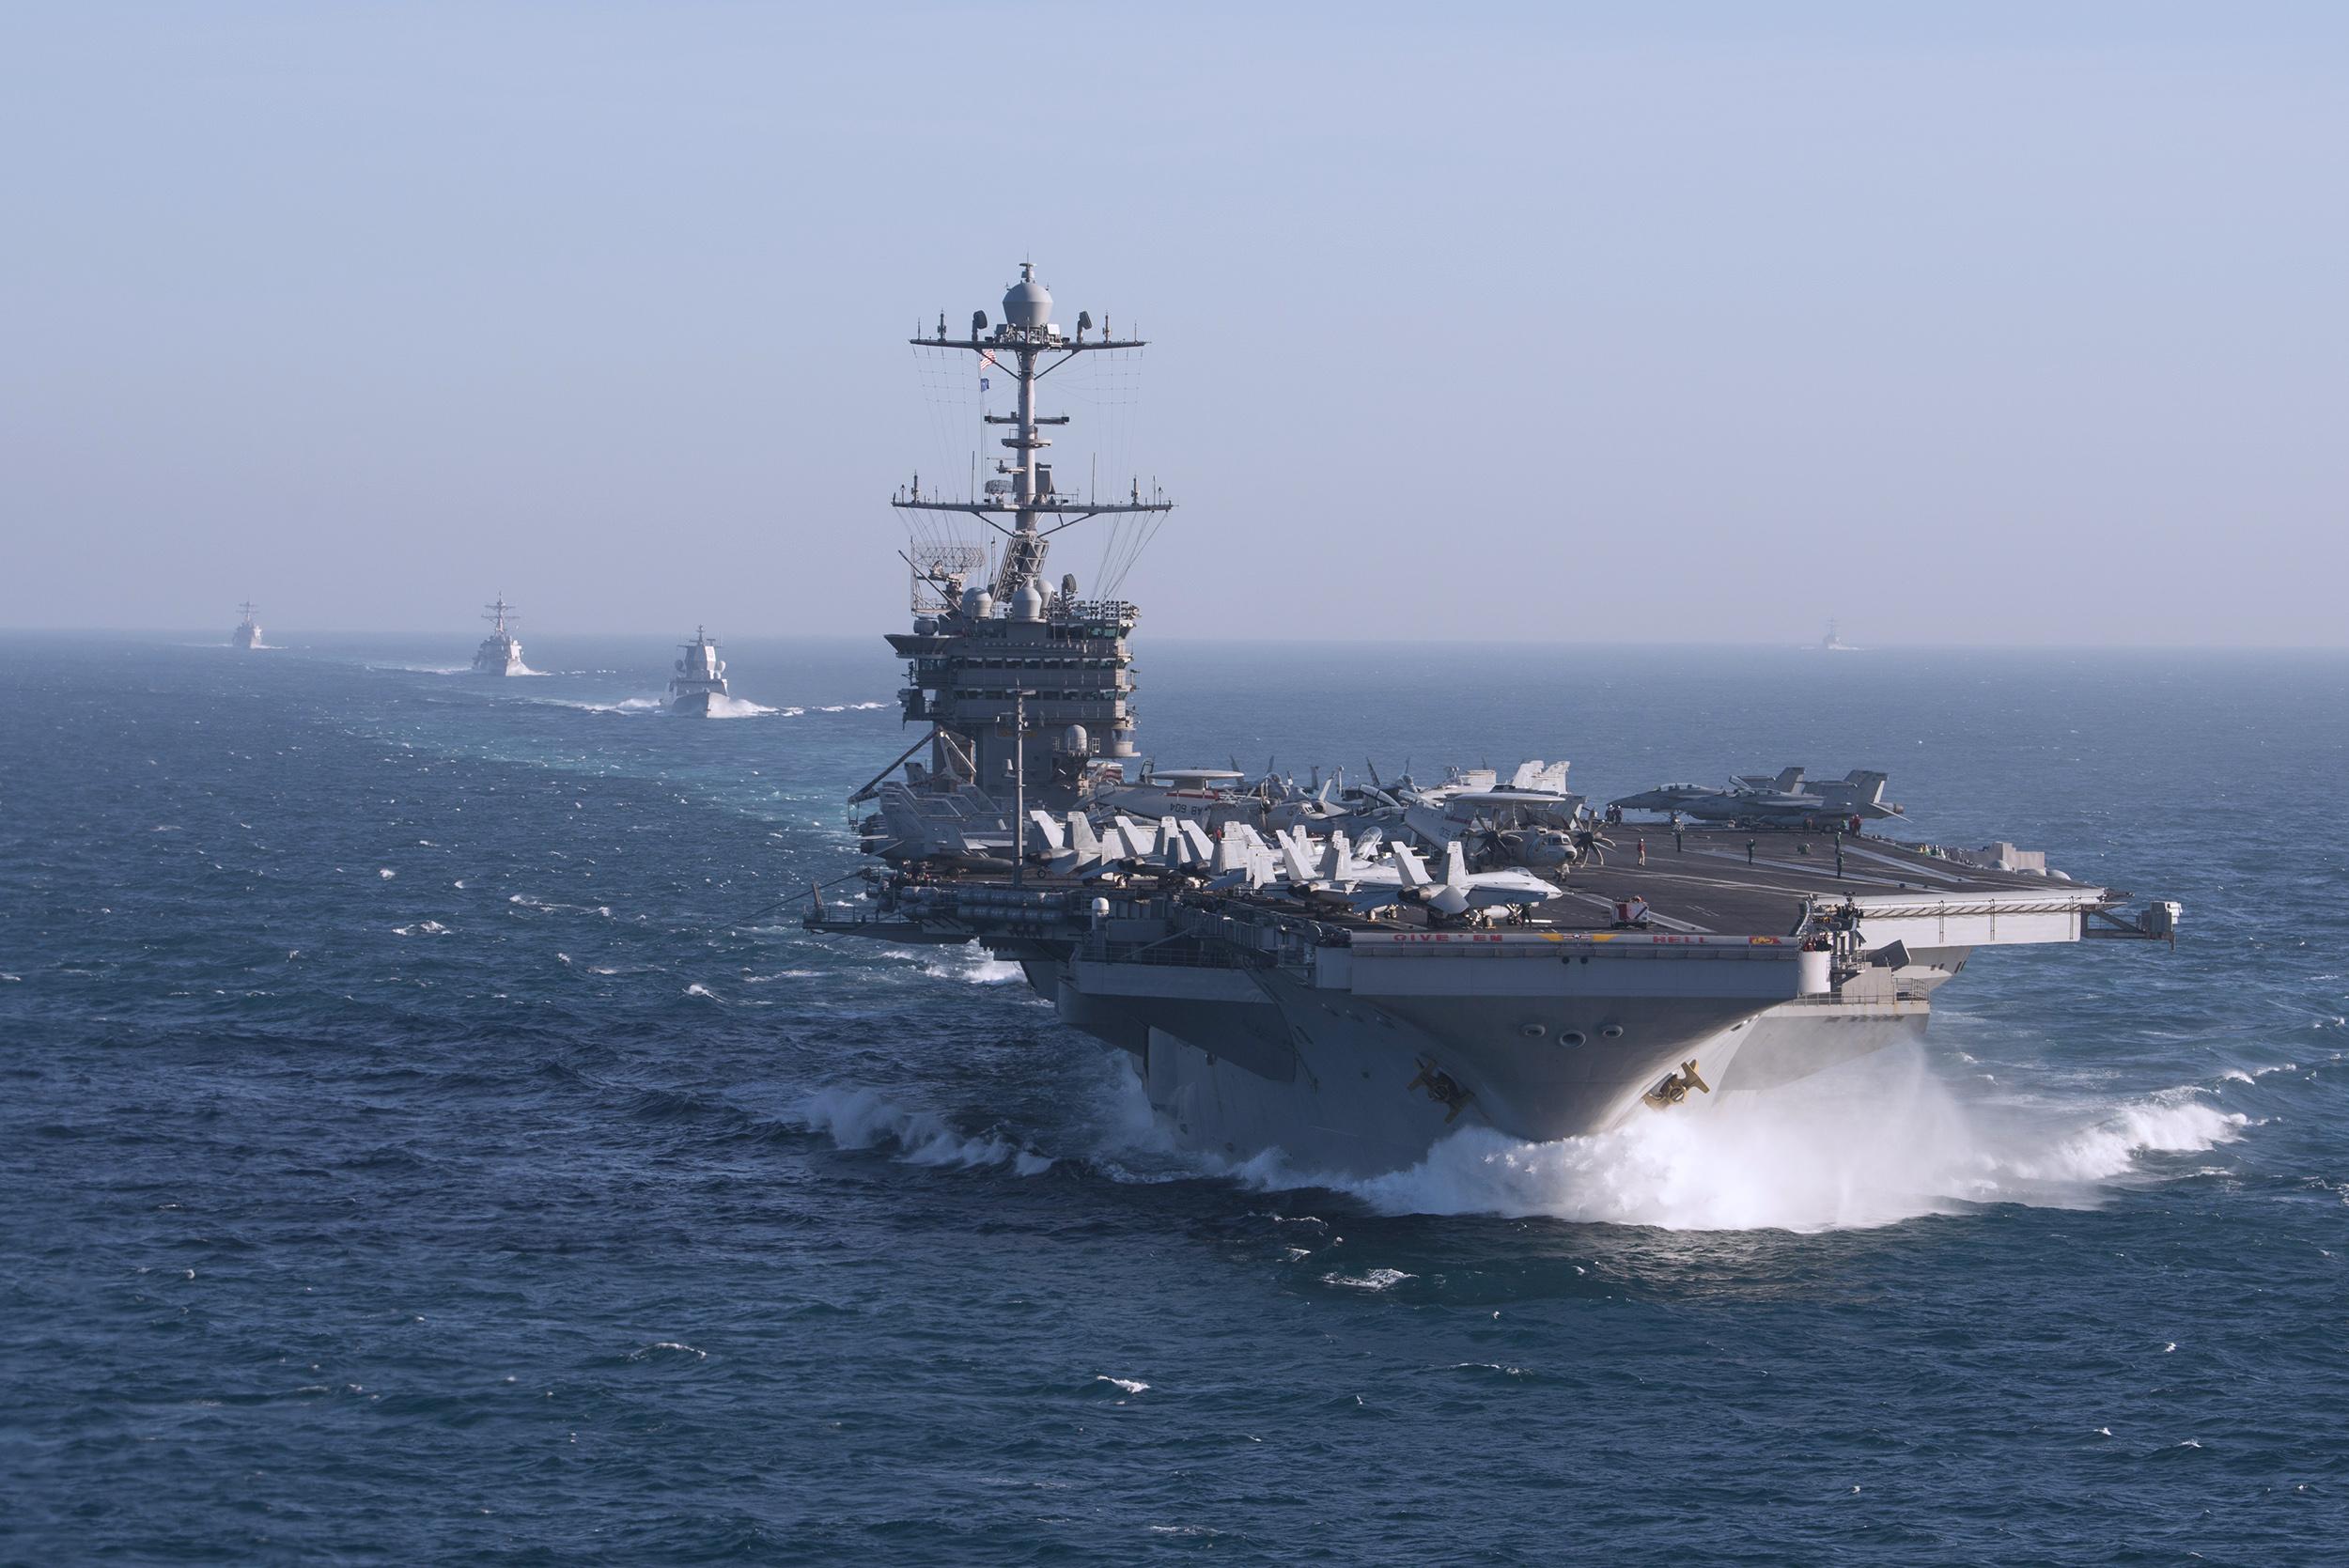 The aircraft carrier USS Harry S. Truman during a training exercise in the Atlantic